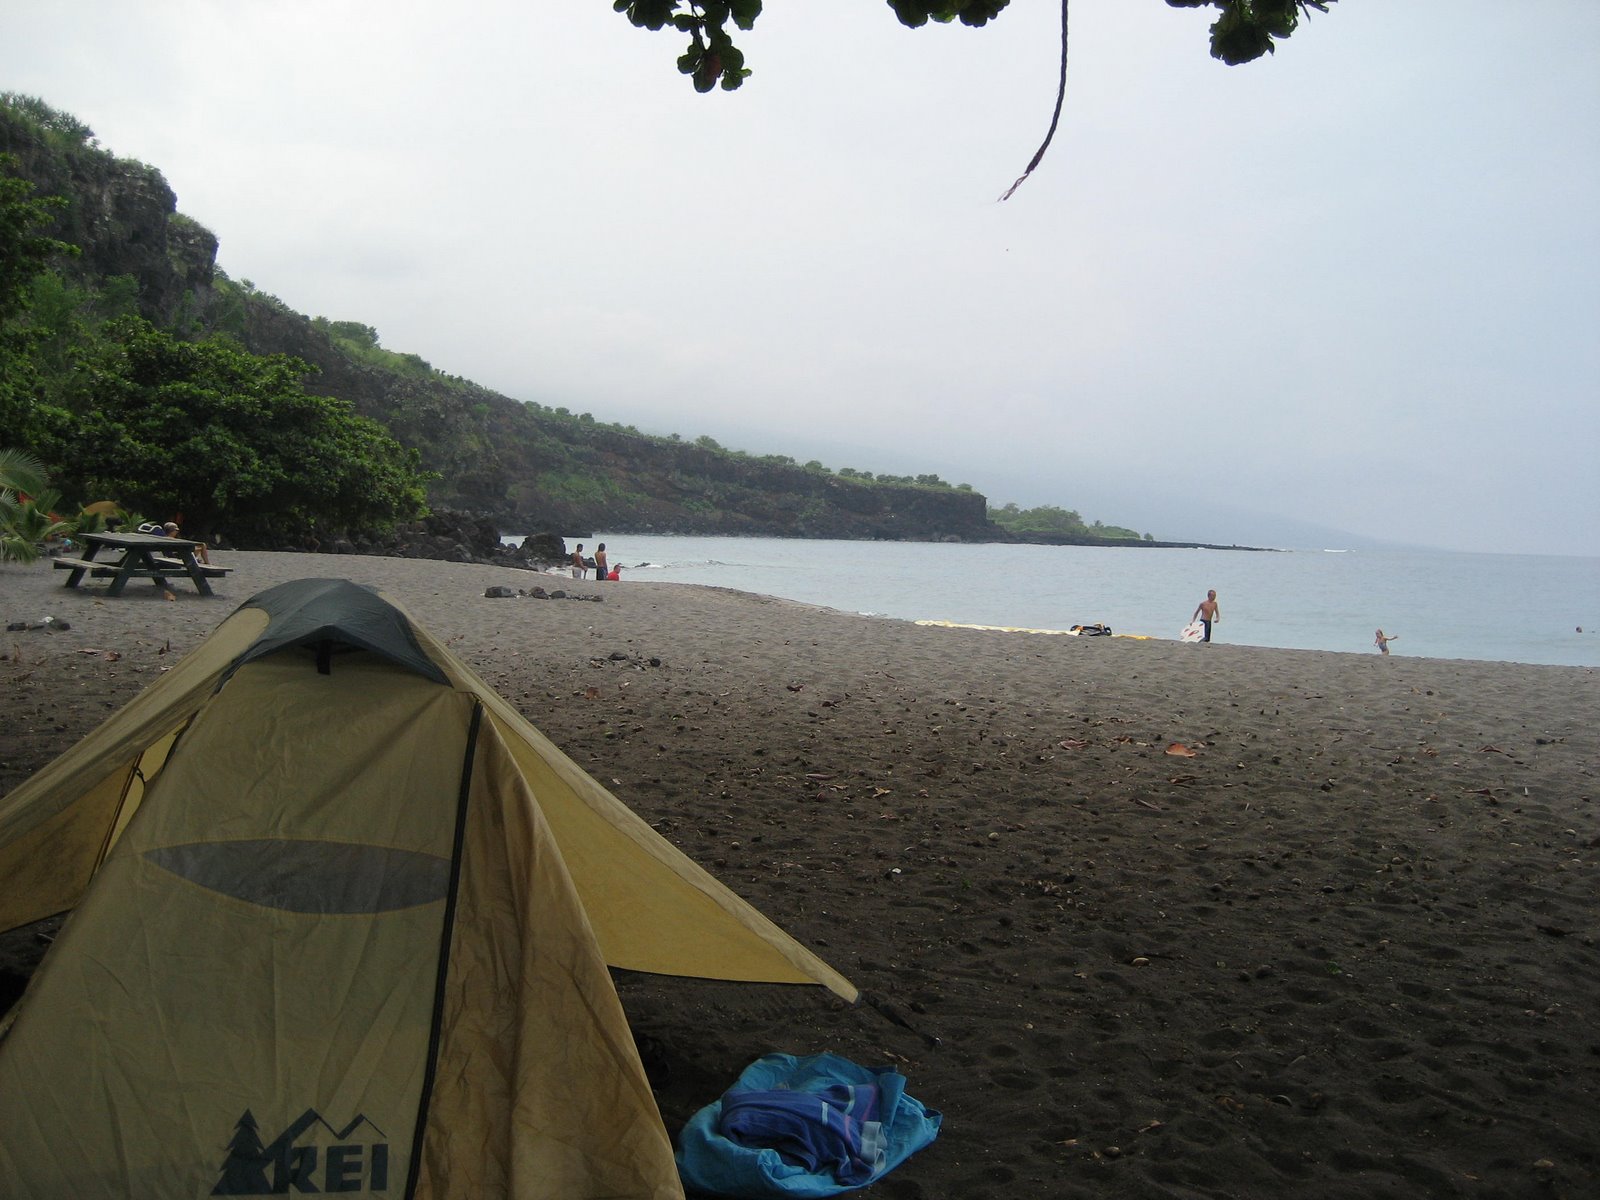 And I mean RIGHT on the beach - this was our tent, and right in the water